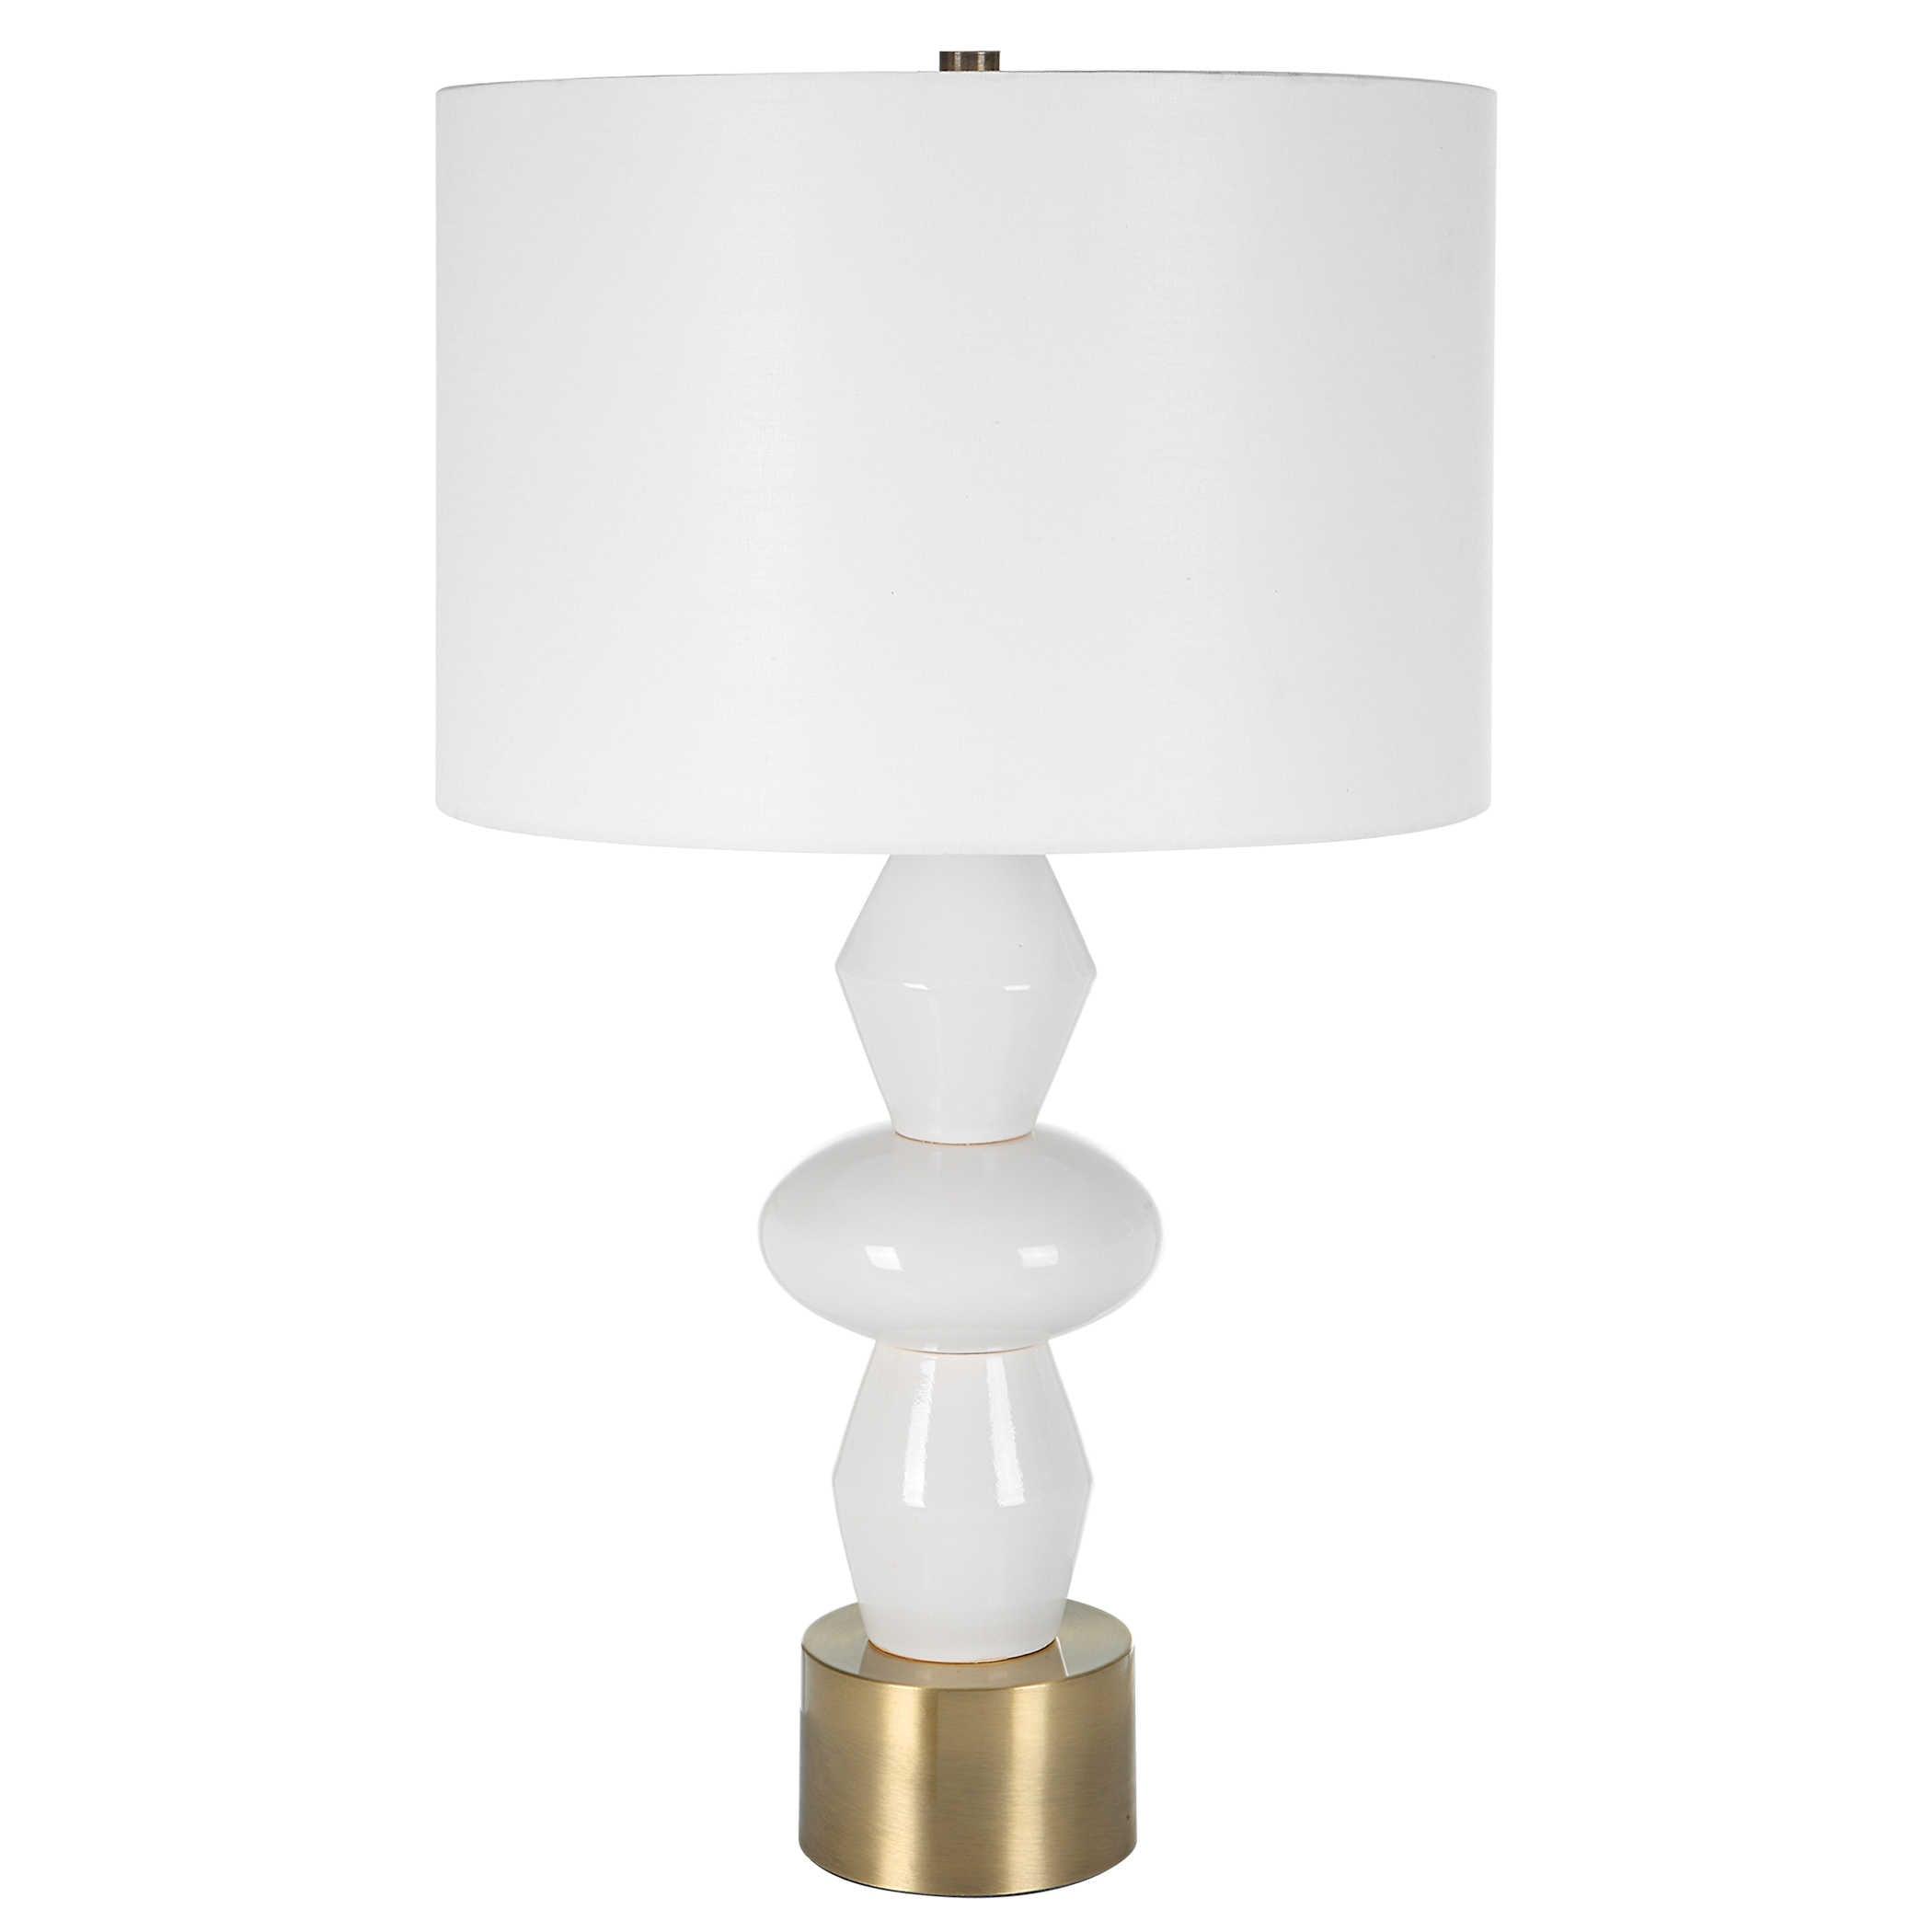 The Uttermost - Architect Table Lamp - 30185-1 | Montreal Lighting & Hardware